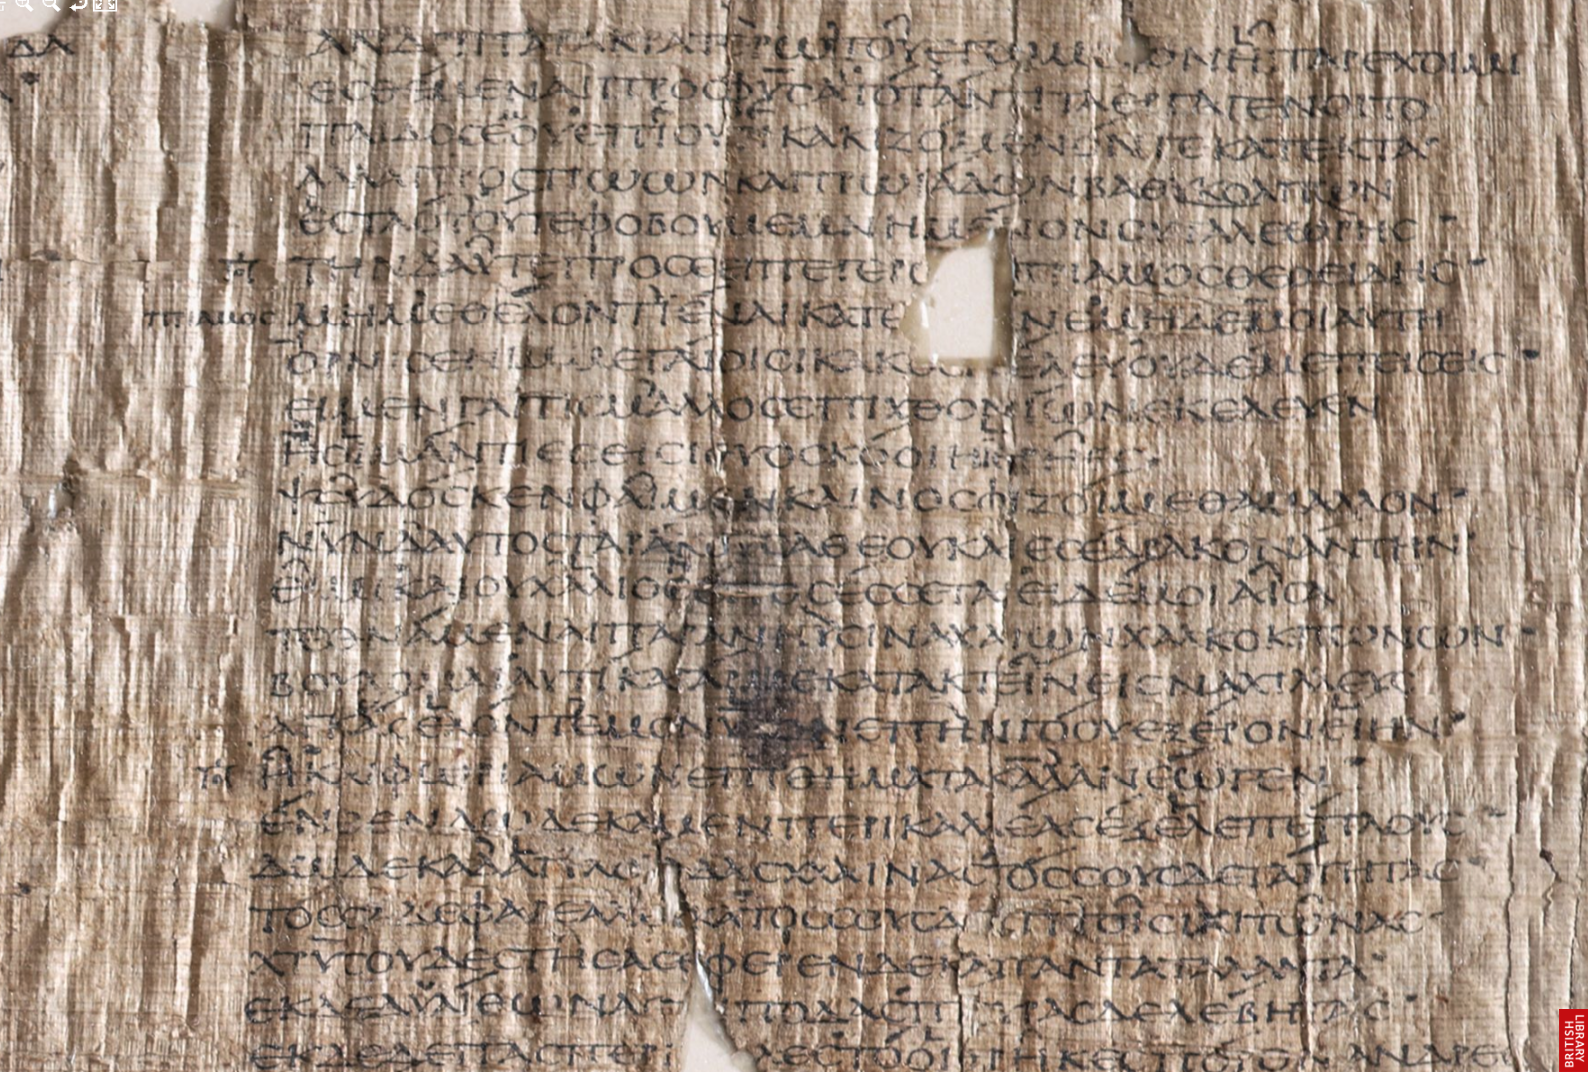 An enlarged photograph of a section of  the digitized Bankes Homer. P. Lond. Lit. 28, TM 60500. Notes in the left margin of the page include the names of characters to "passage of direct speech as well as abbreviated notes marking narrative sections in the text."